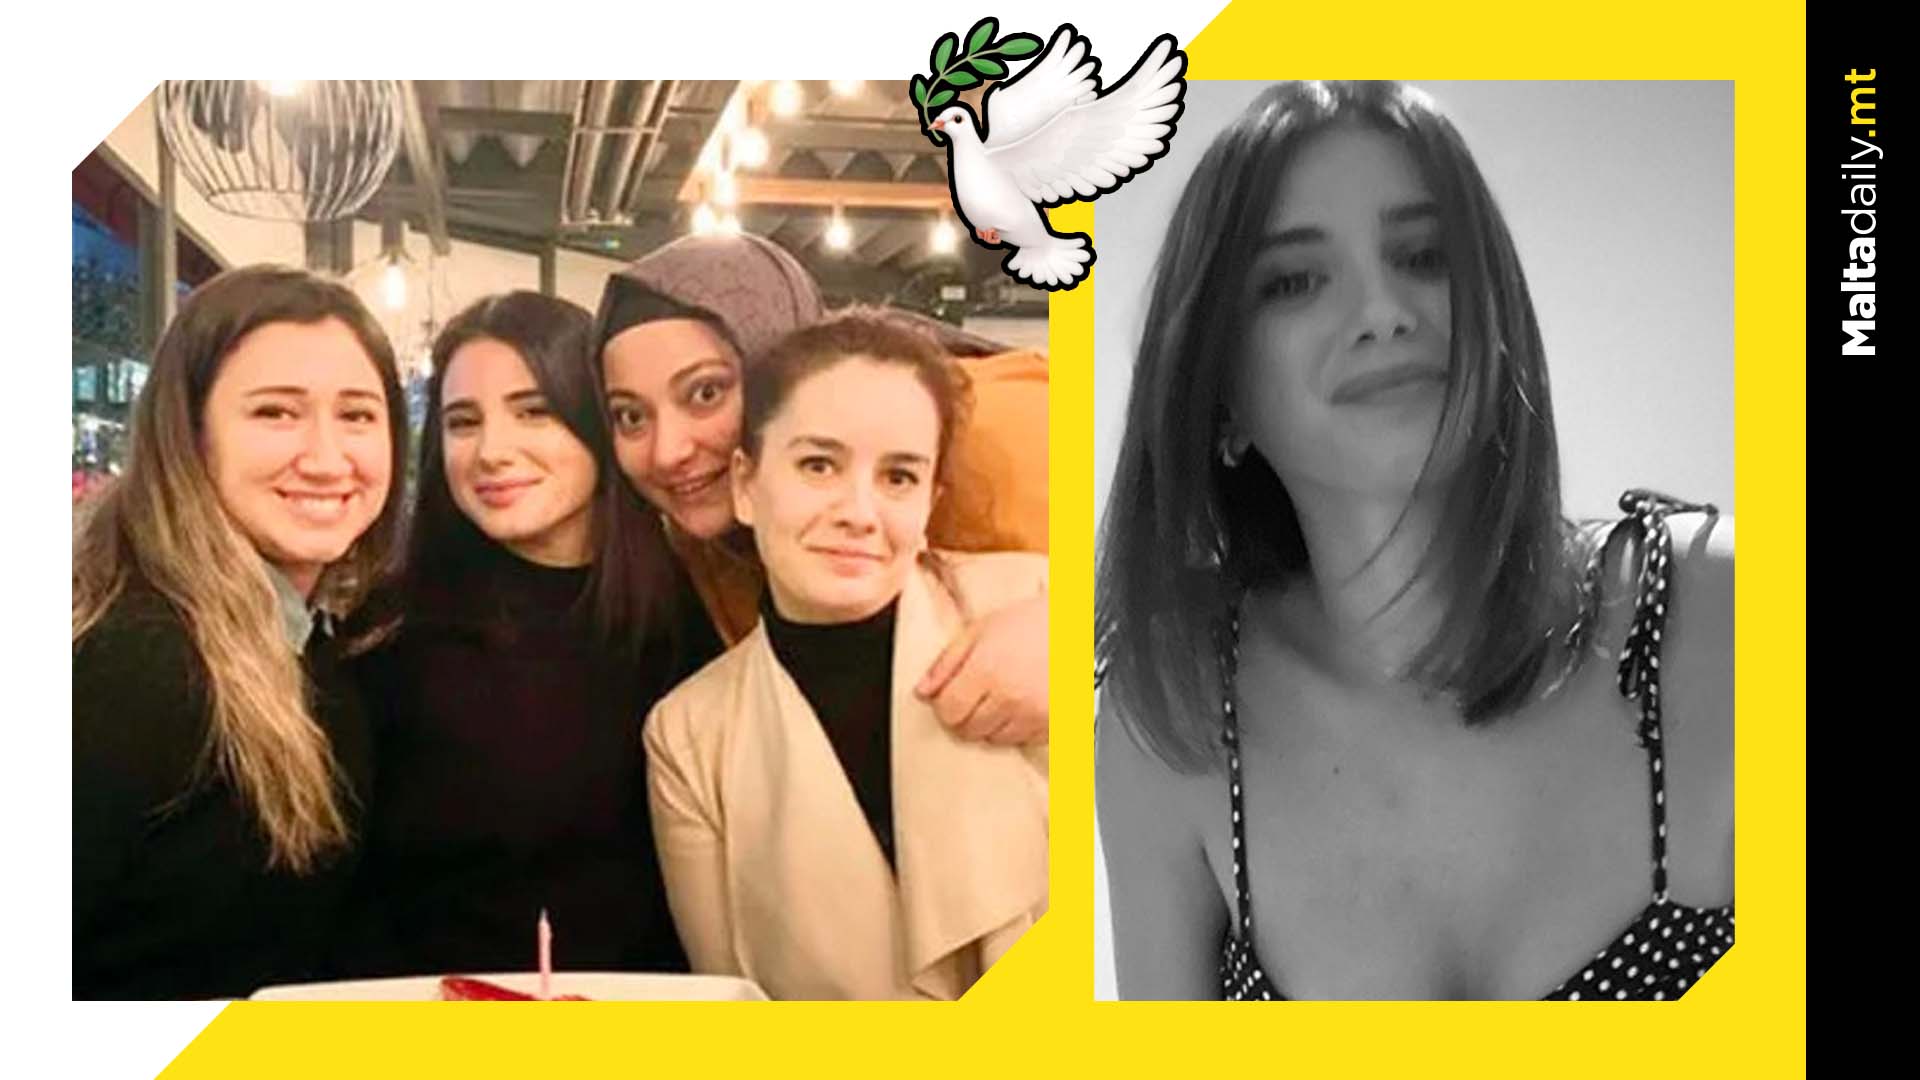 Pelin Kaya’s last photo with friends before fatal accident revealed